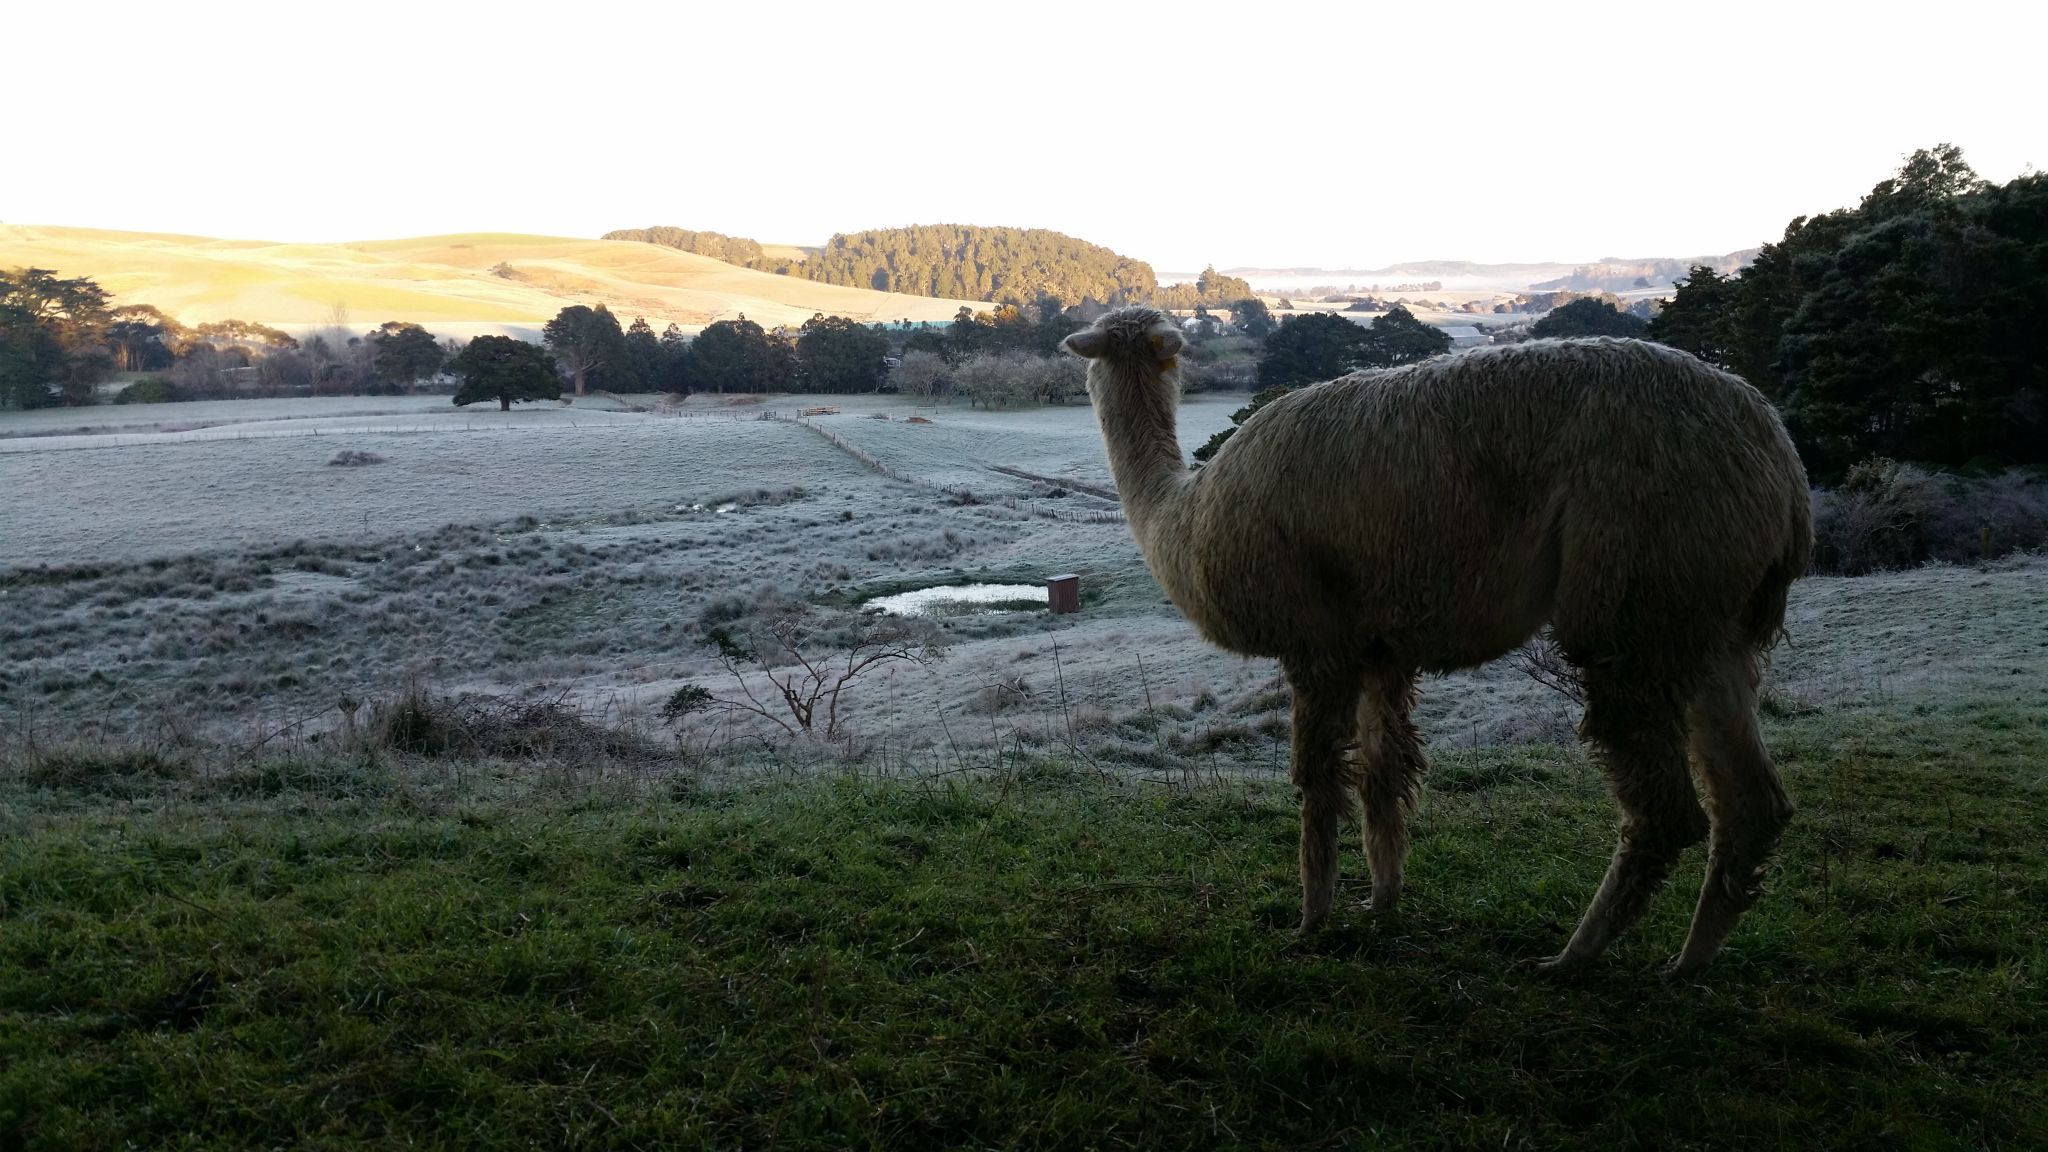 Geena watching over the frosty Kaipara valley